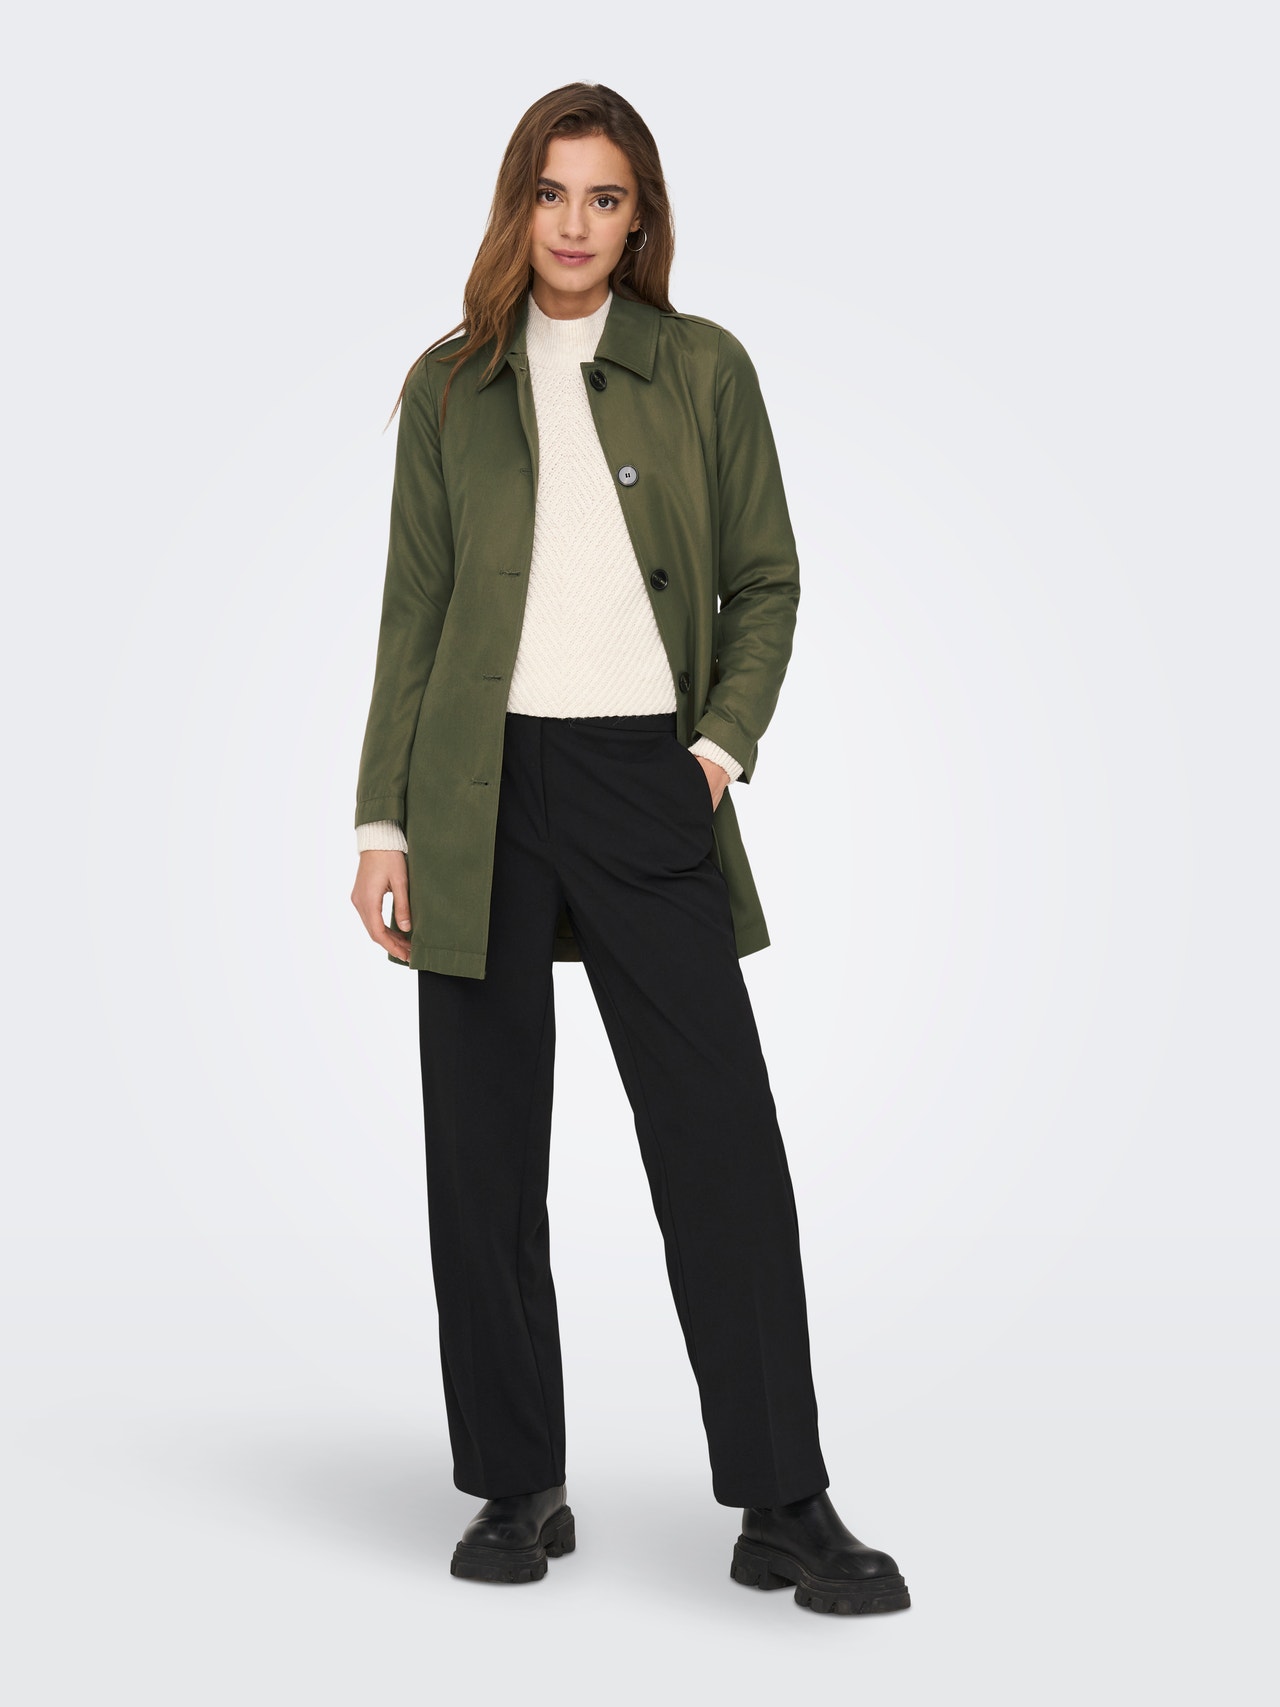 ONLY Short belted Trenchcoat -Ivy Green - 15246191